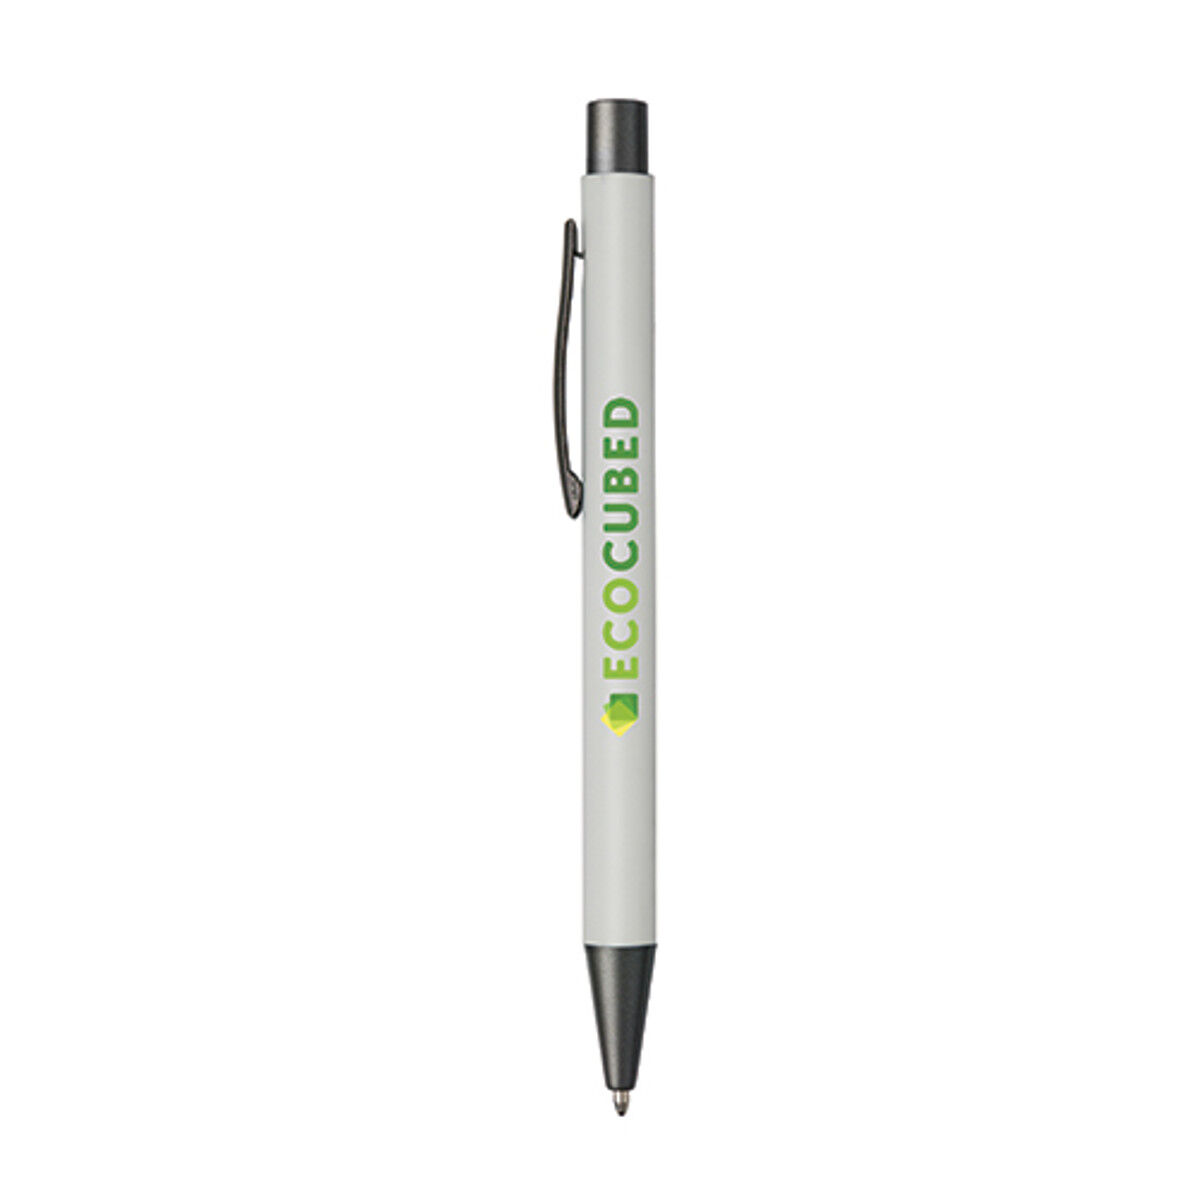 Bowie Pen (white, printed)